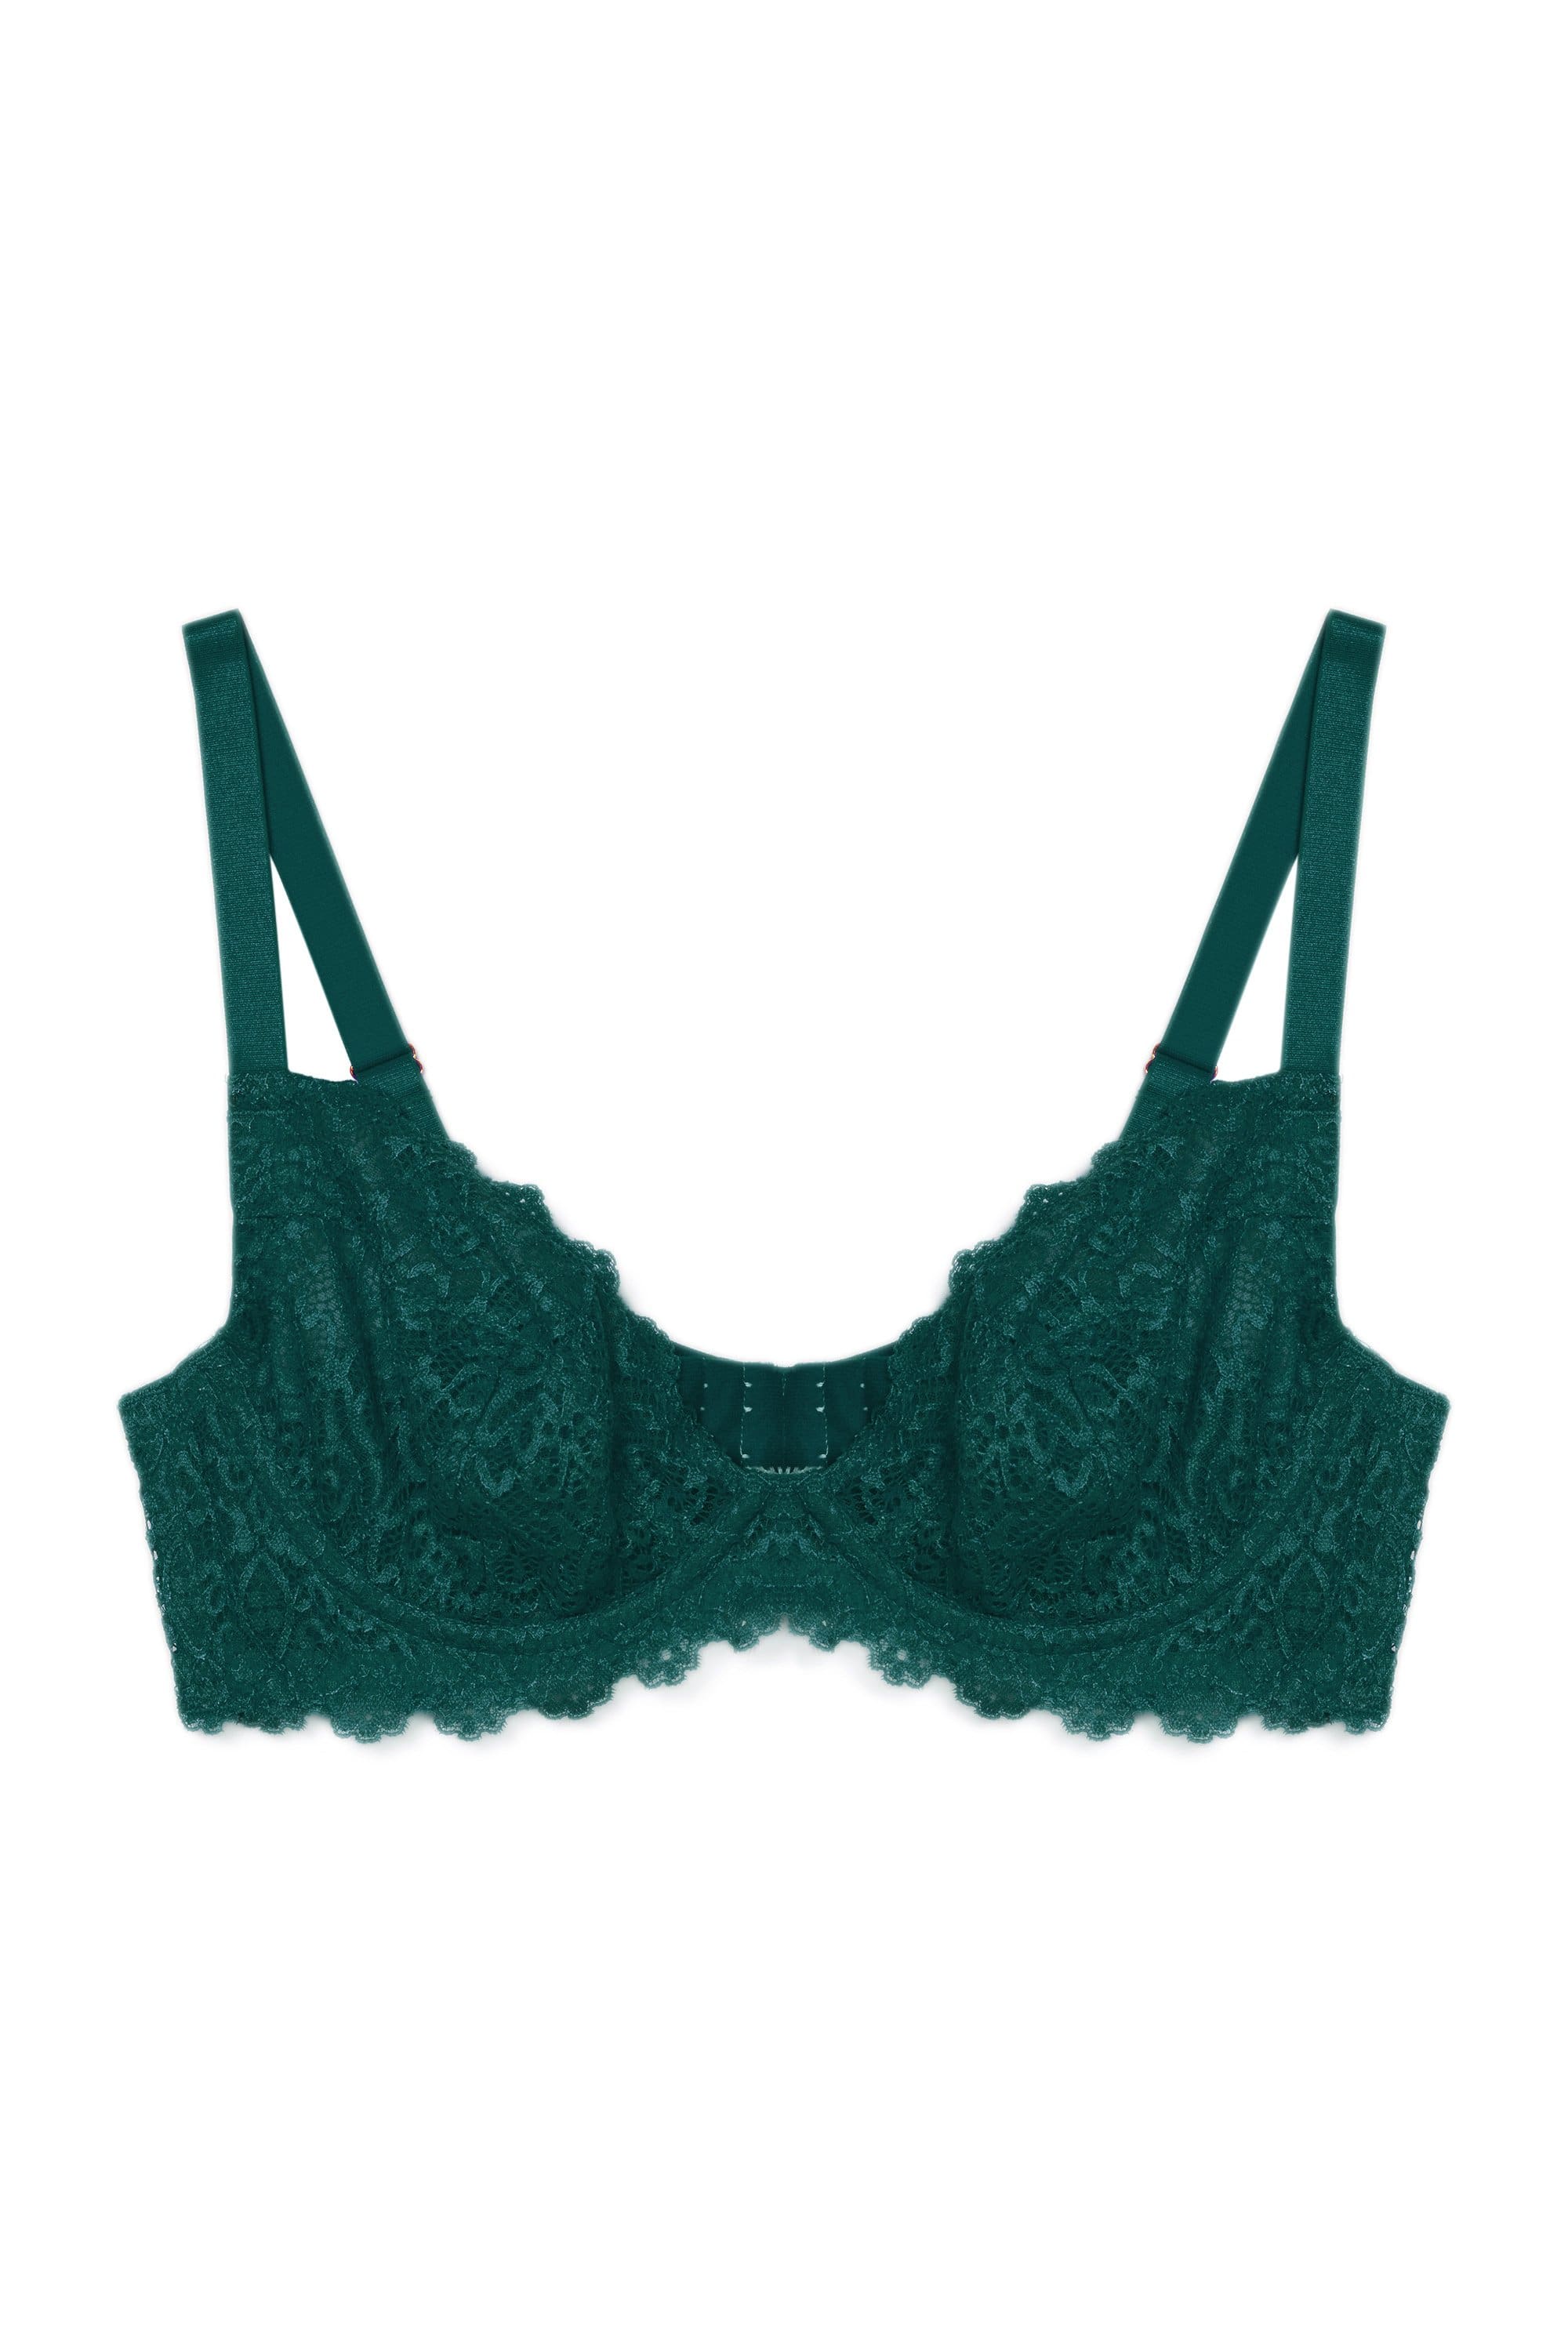 Ariana Teal Everyday Lace Bra